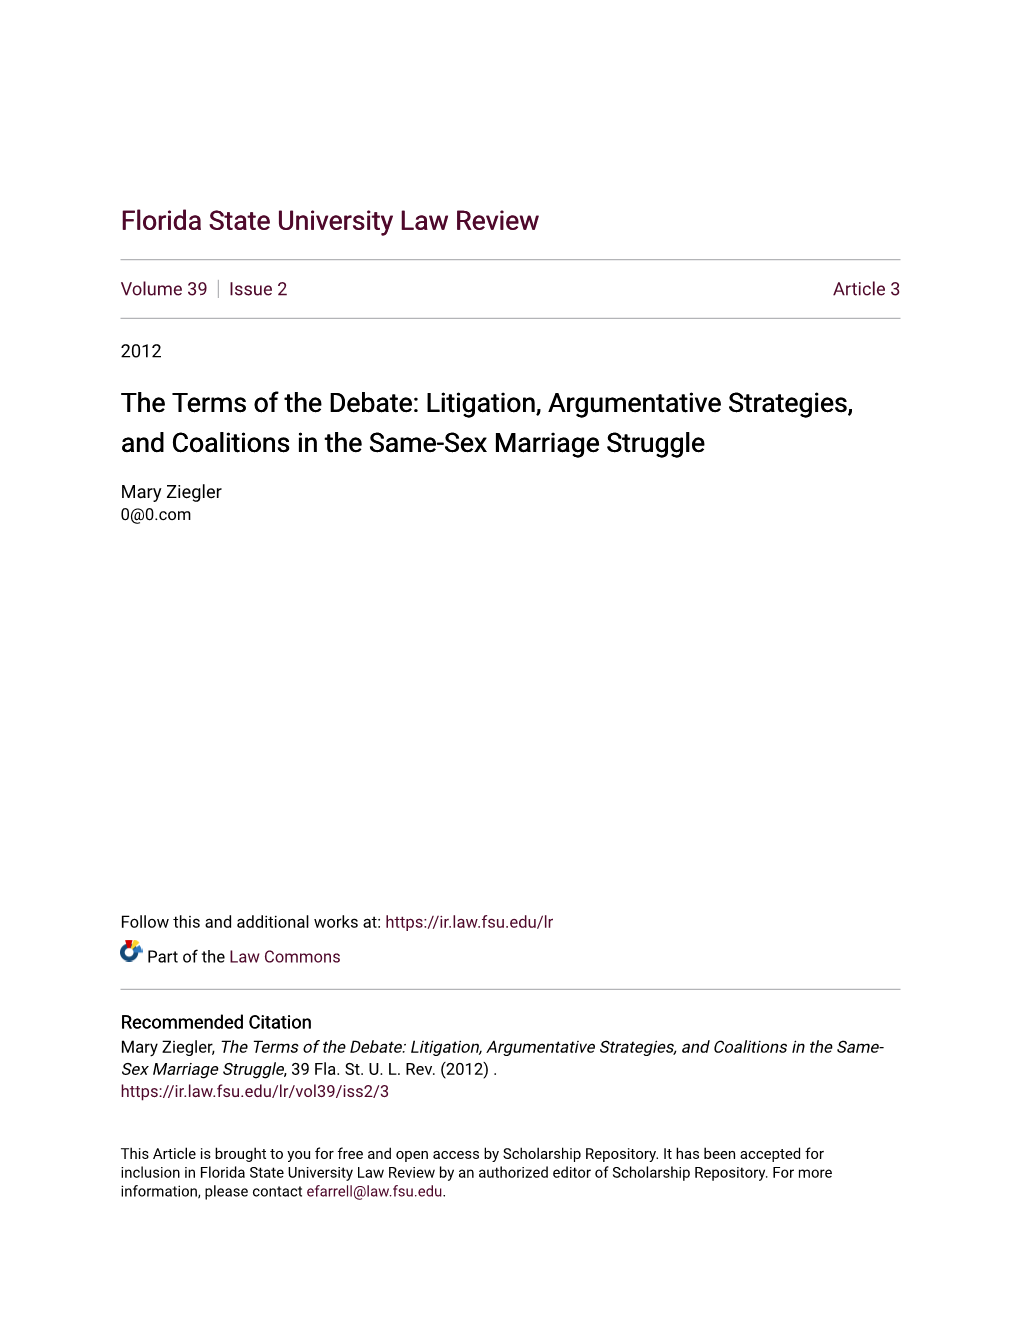 Litigation, Argumentative Strategies, and Coalitions in the Same-Sex Marriage Struggle